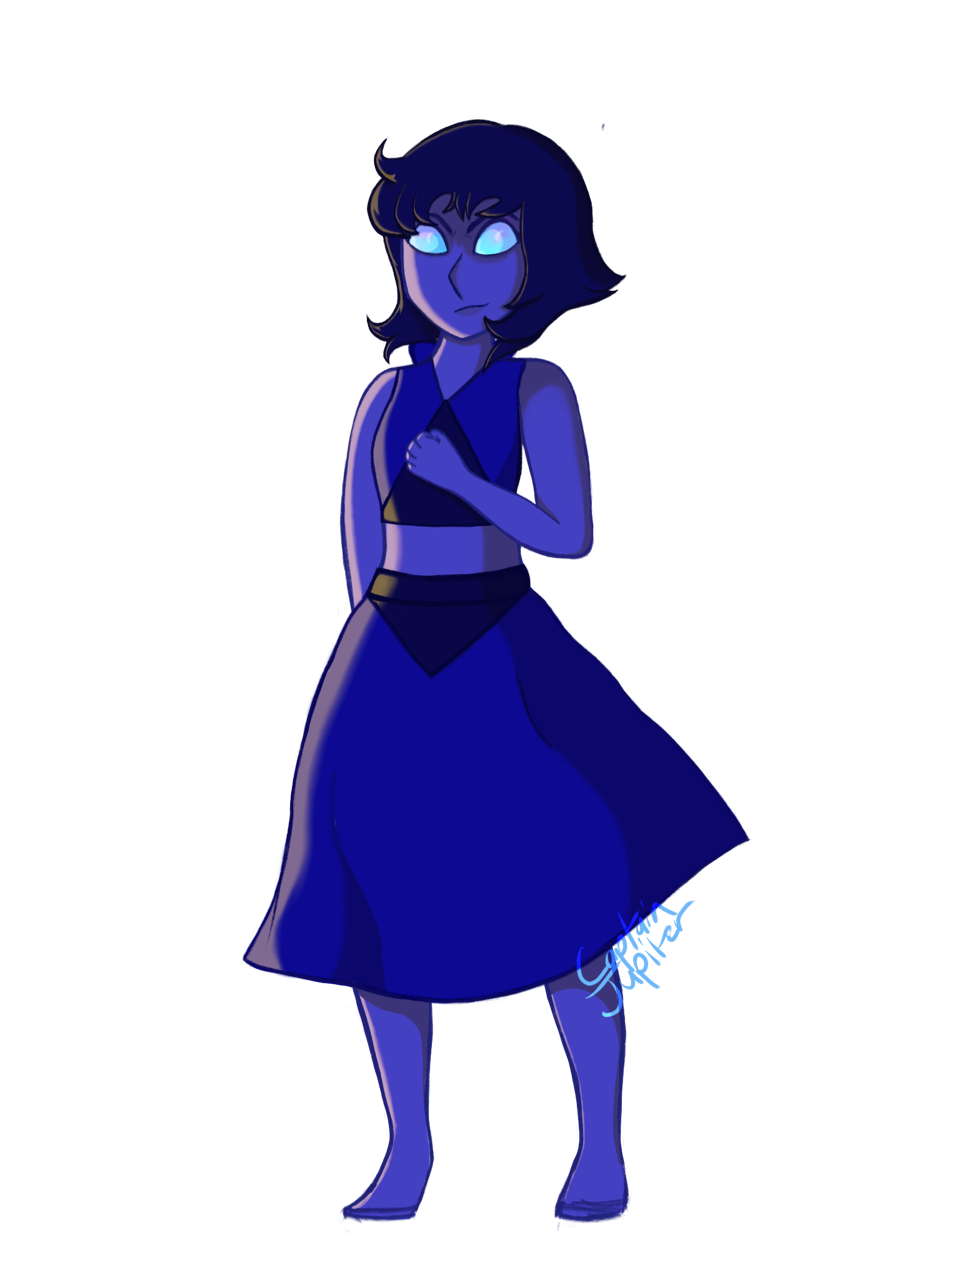 Lapis WIP! Probs won’t do anything else to it so I don’t have to do her feet lmao